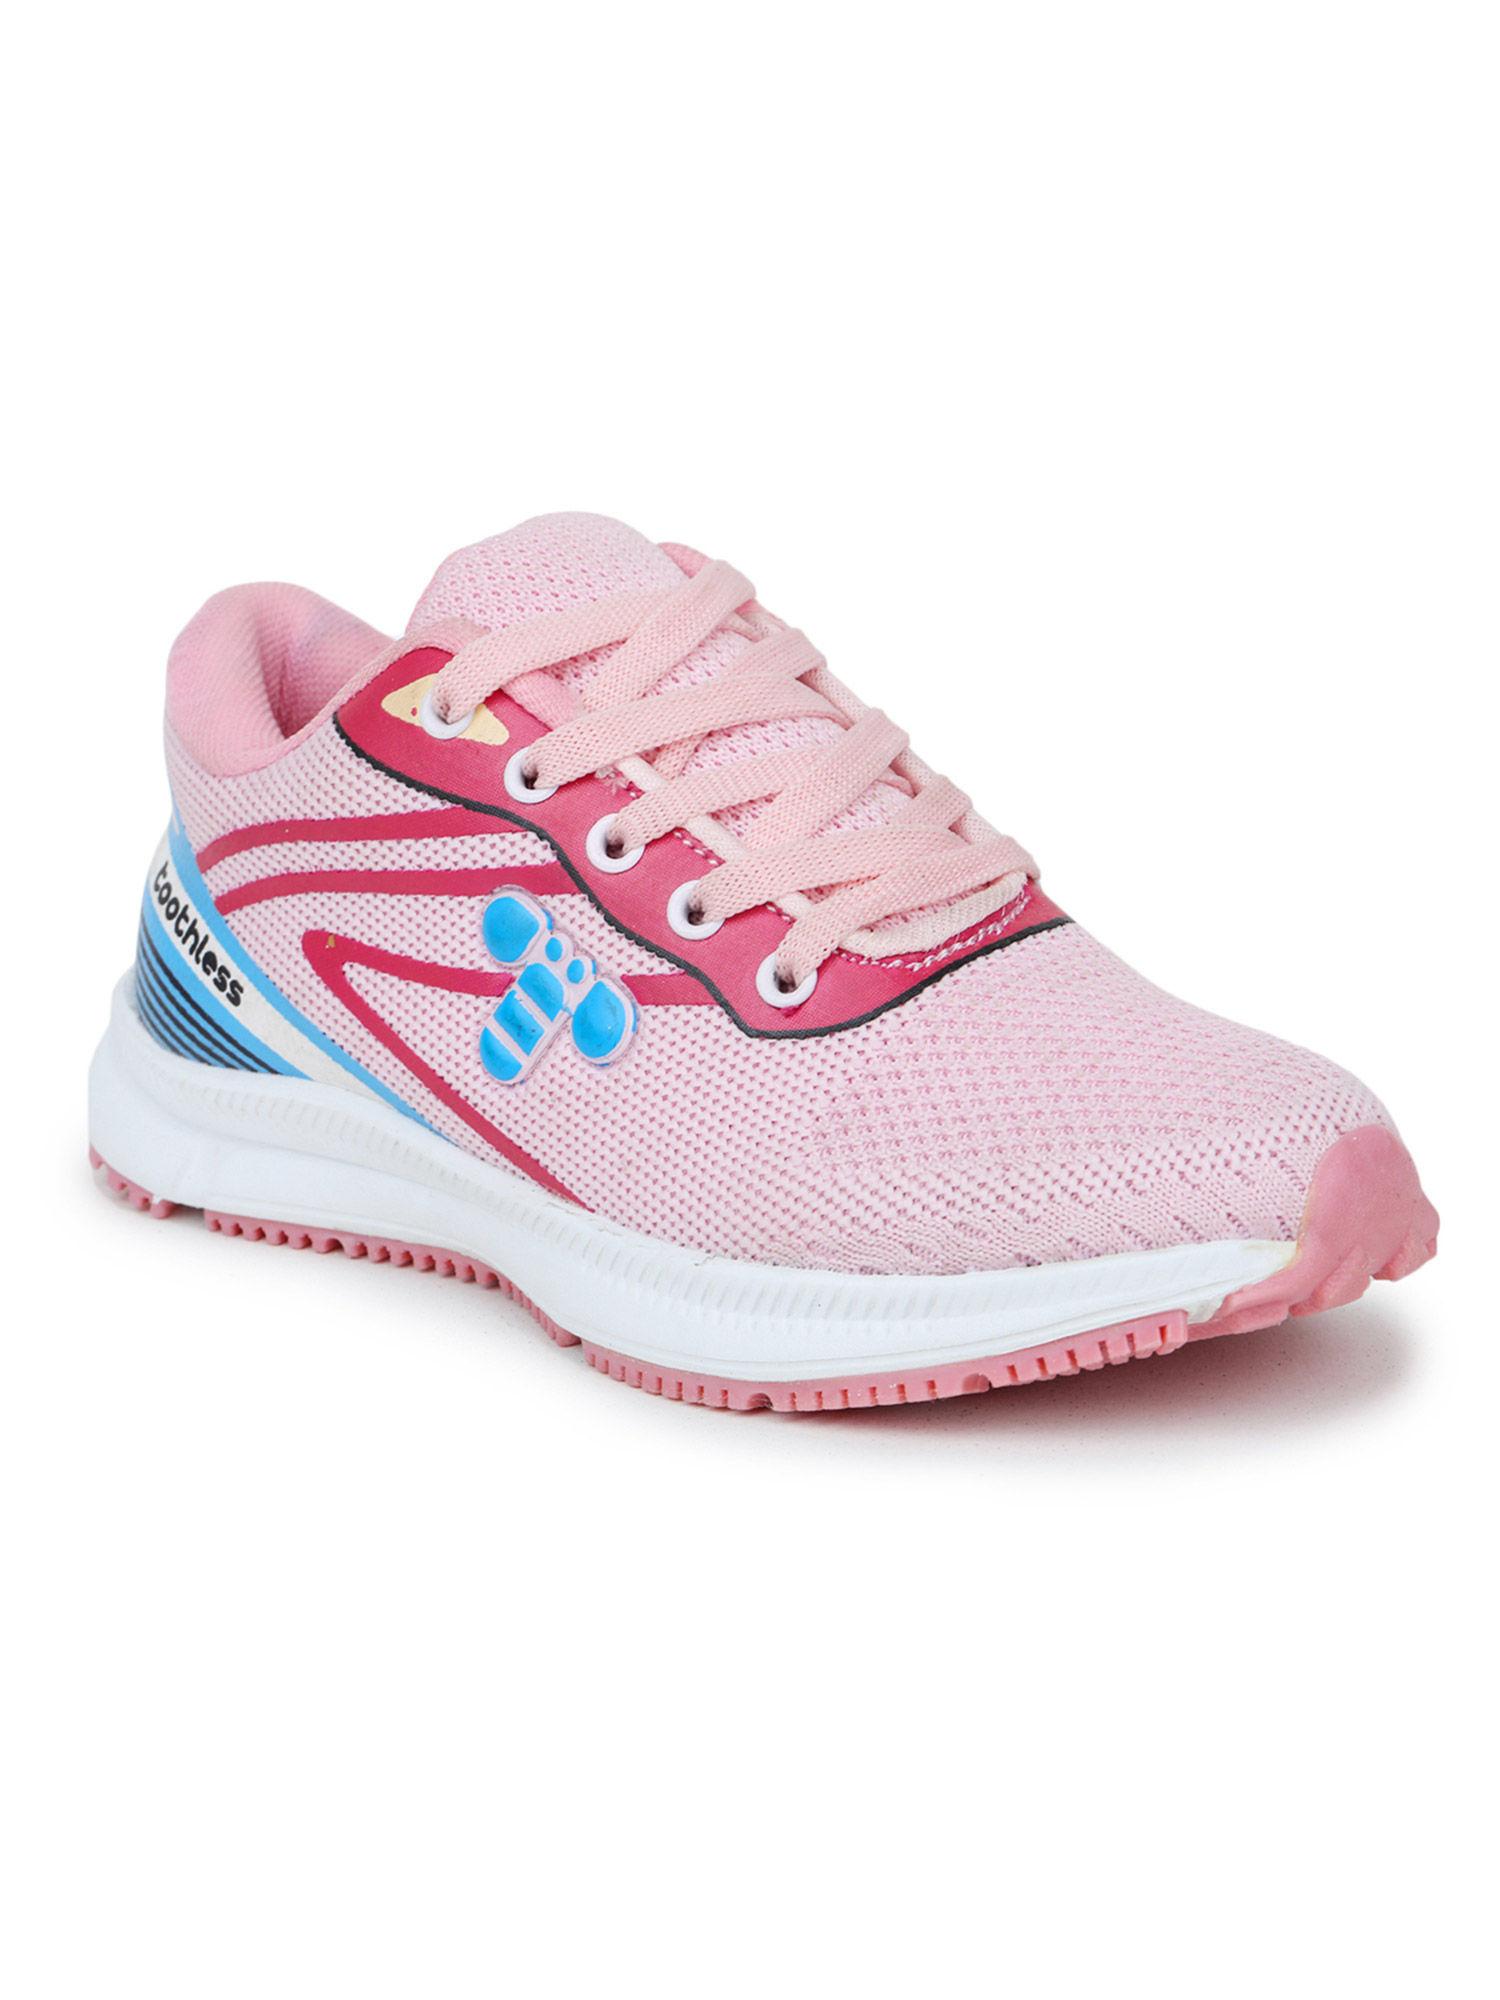 girls pink sports shoes